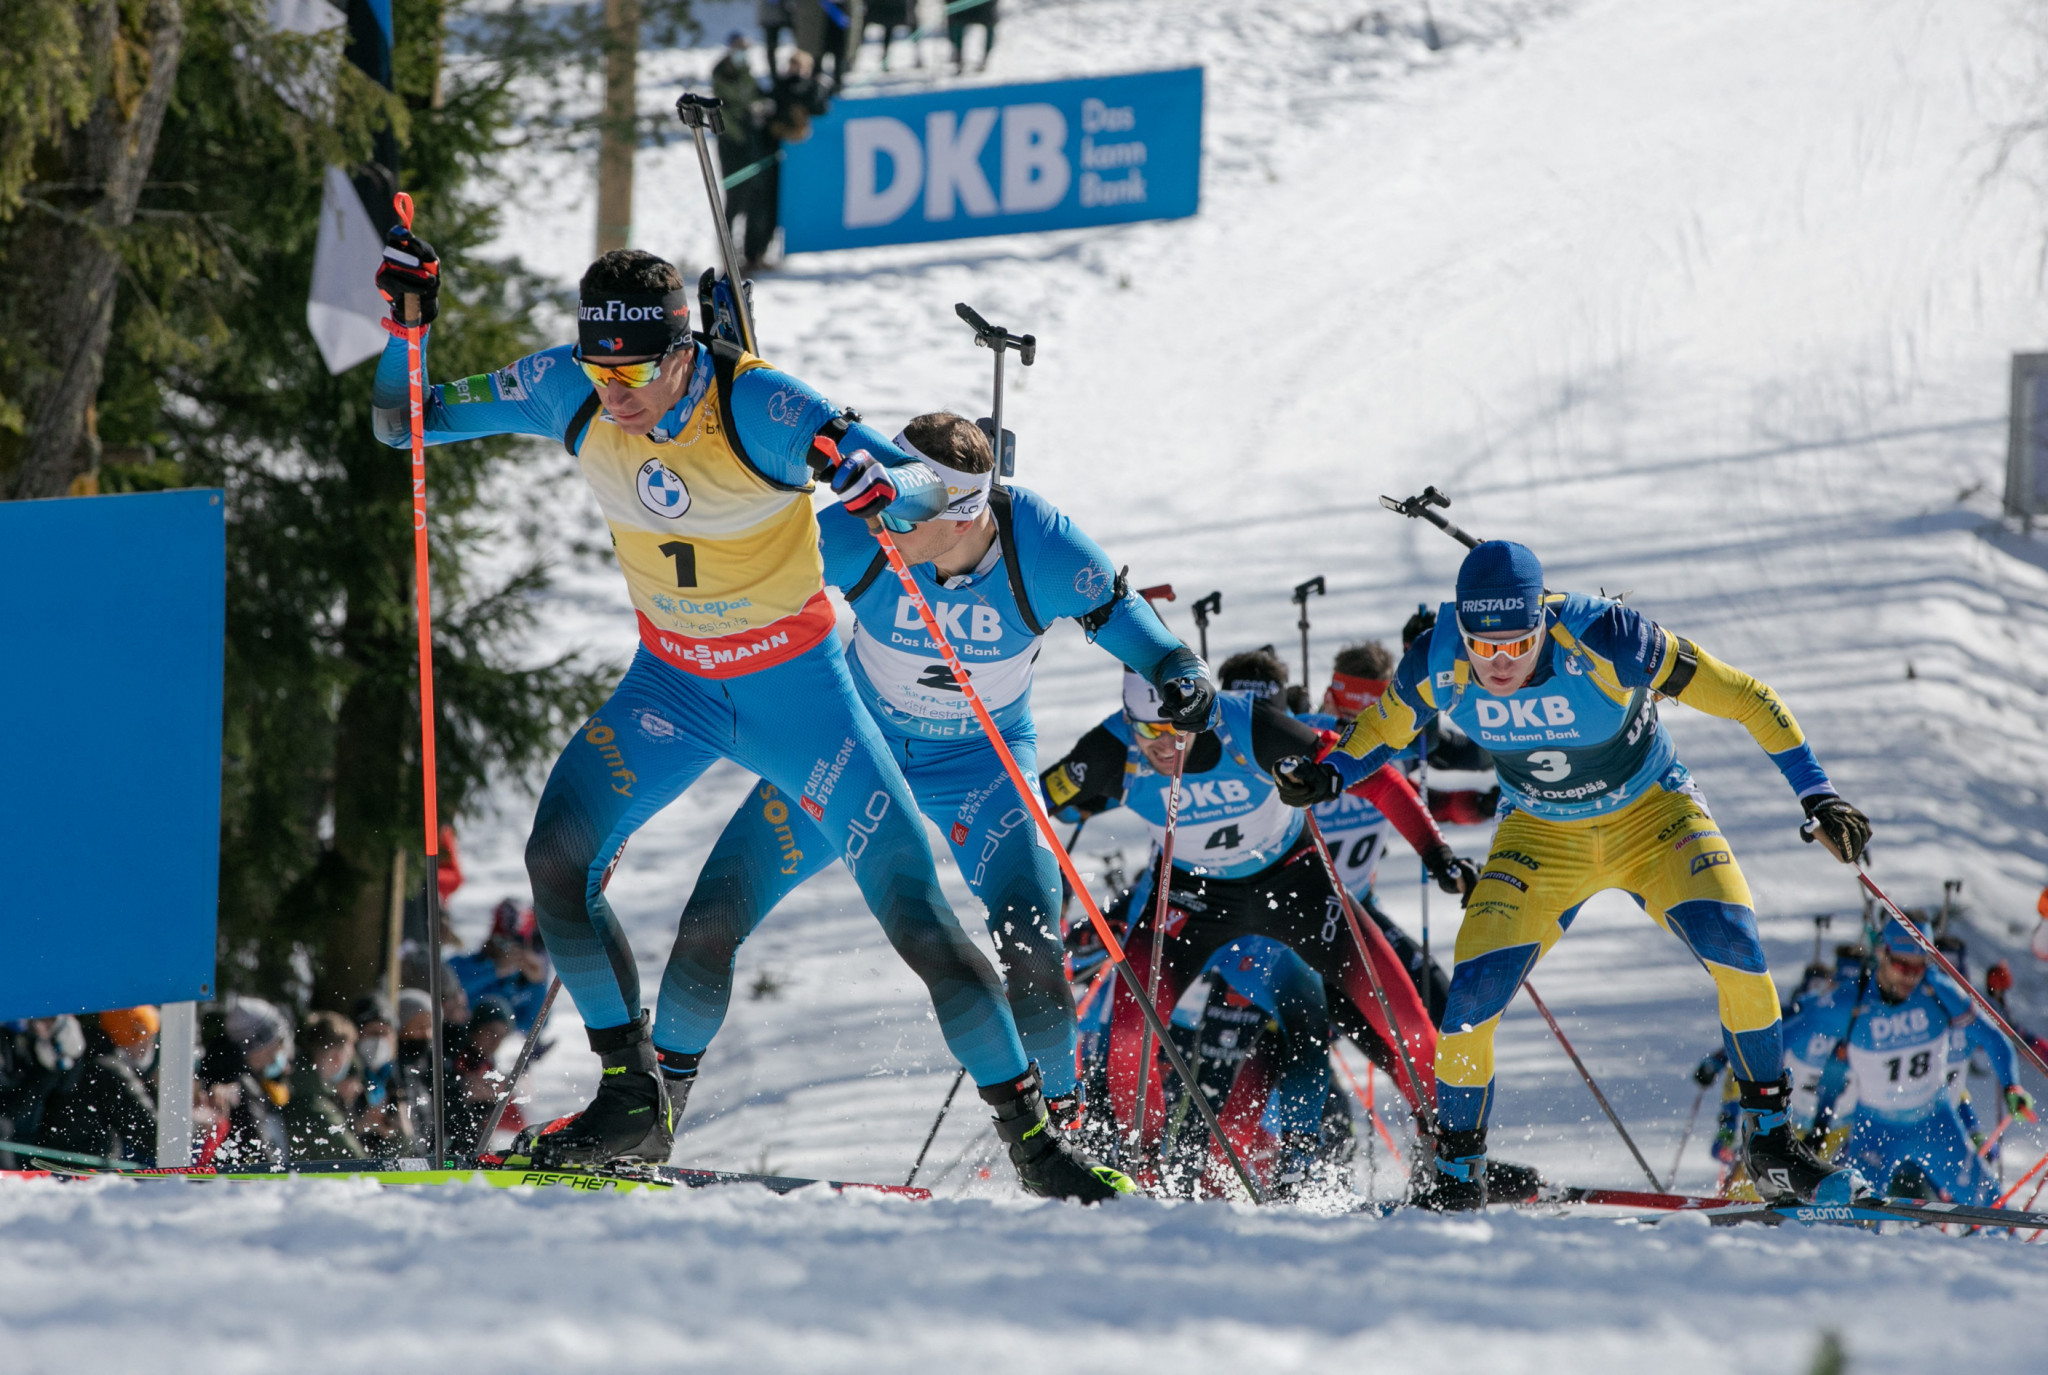 Quentin Fillon Maillet, front left, clinch the Biathlon World Cup by finishing second in Otepää in Estonia ©Getty Images